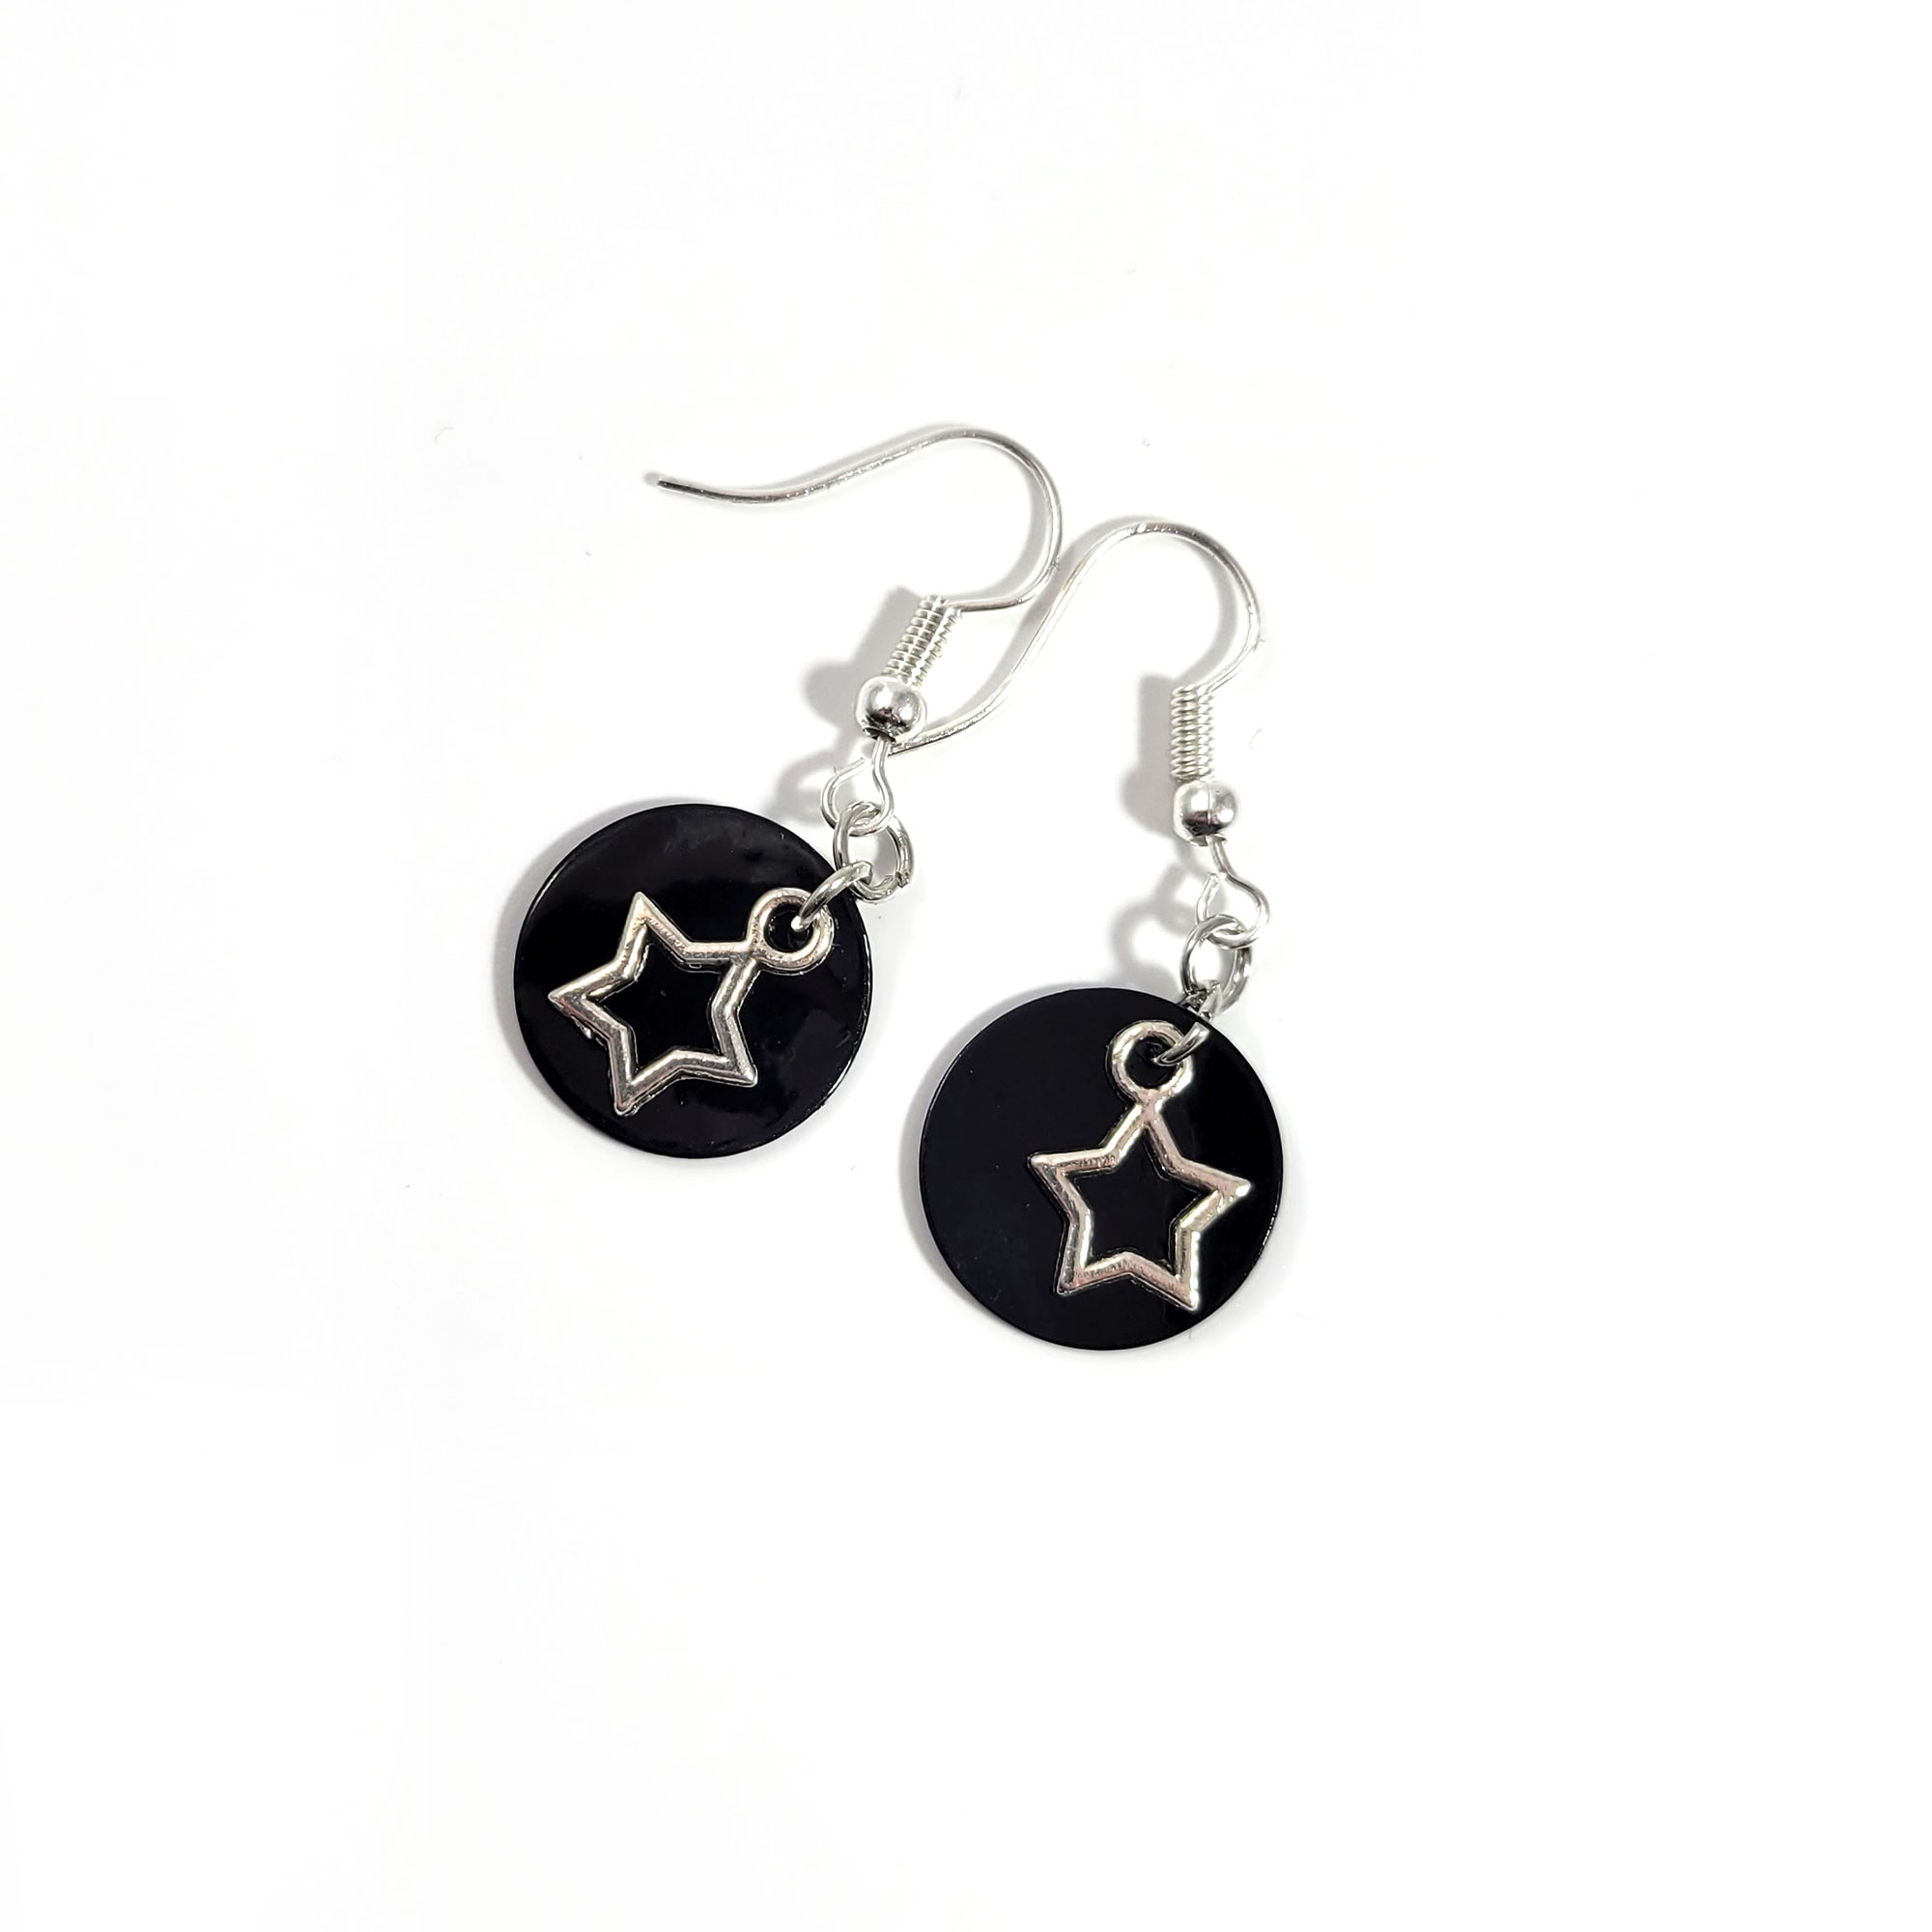 The Stars at Night Earrings by Wilde Designs